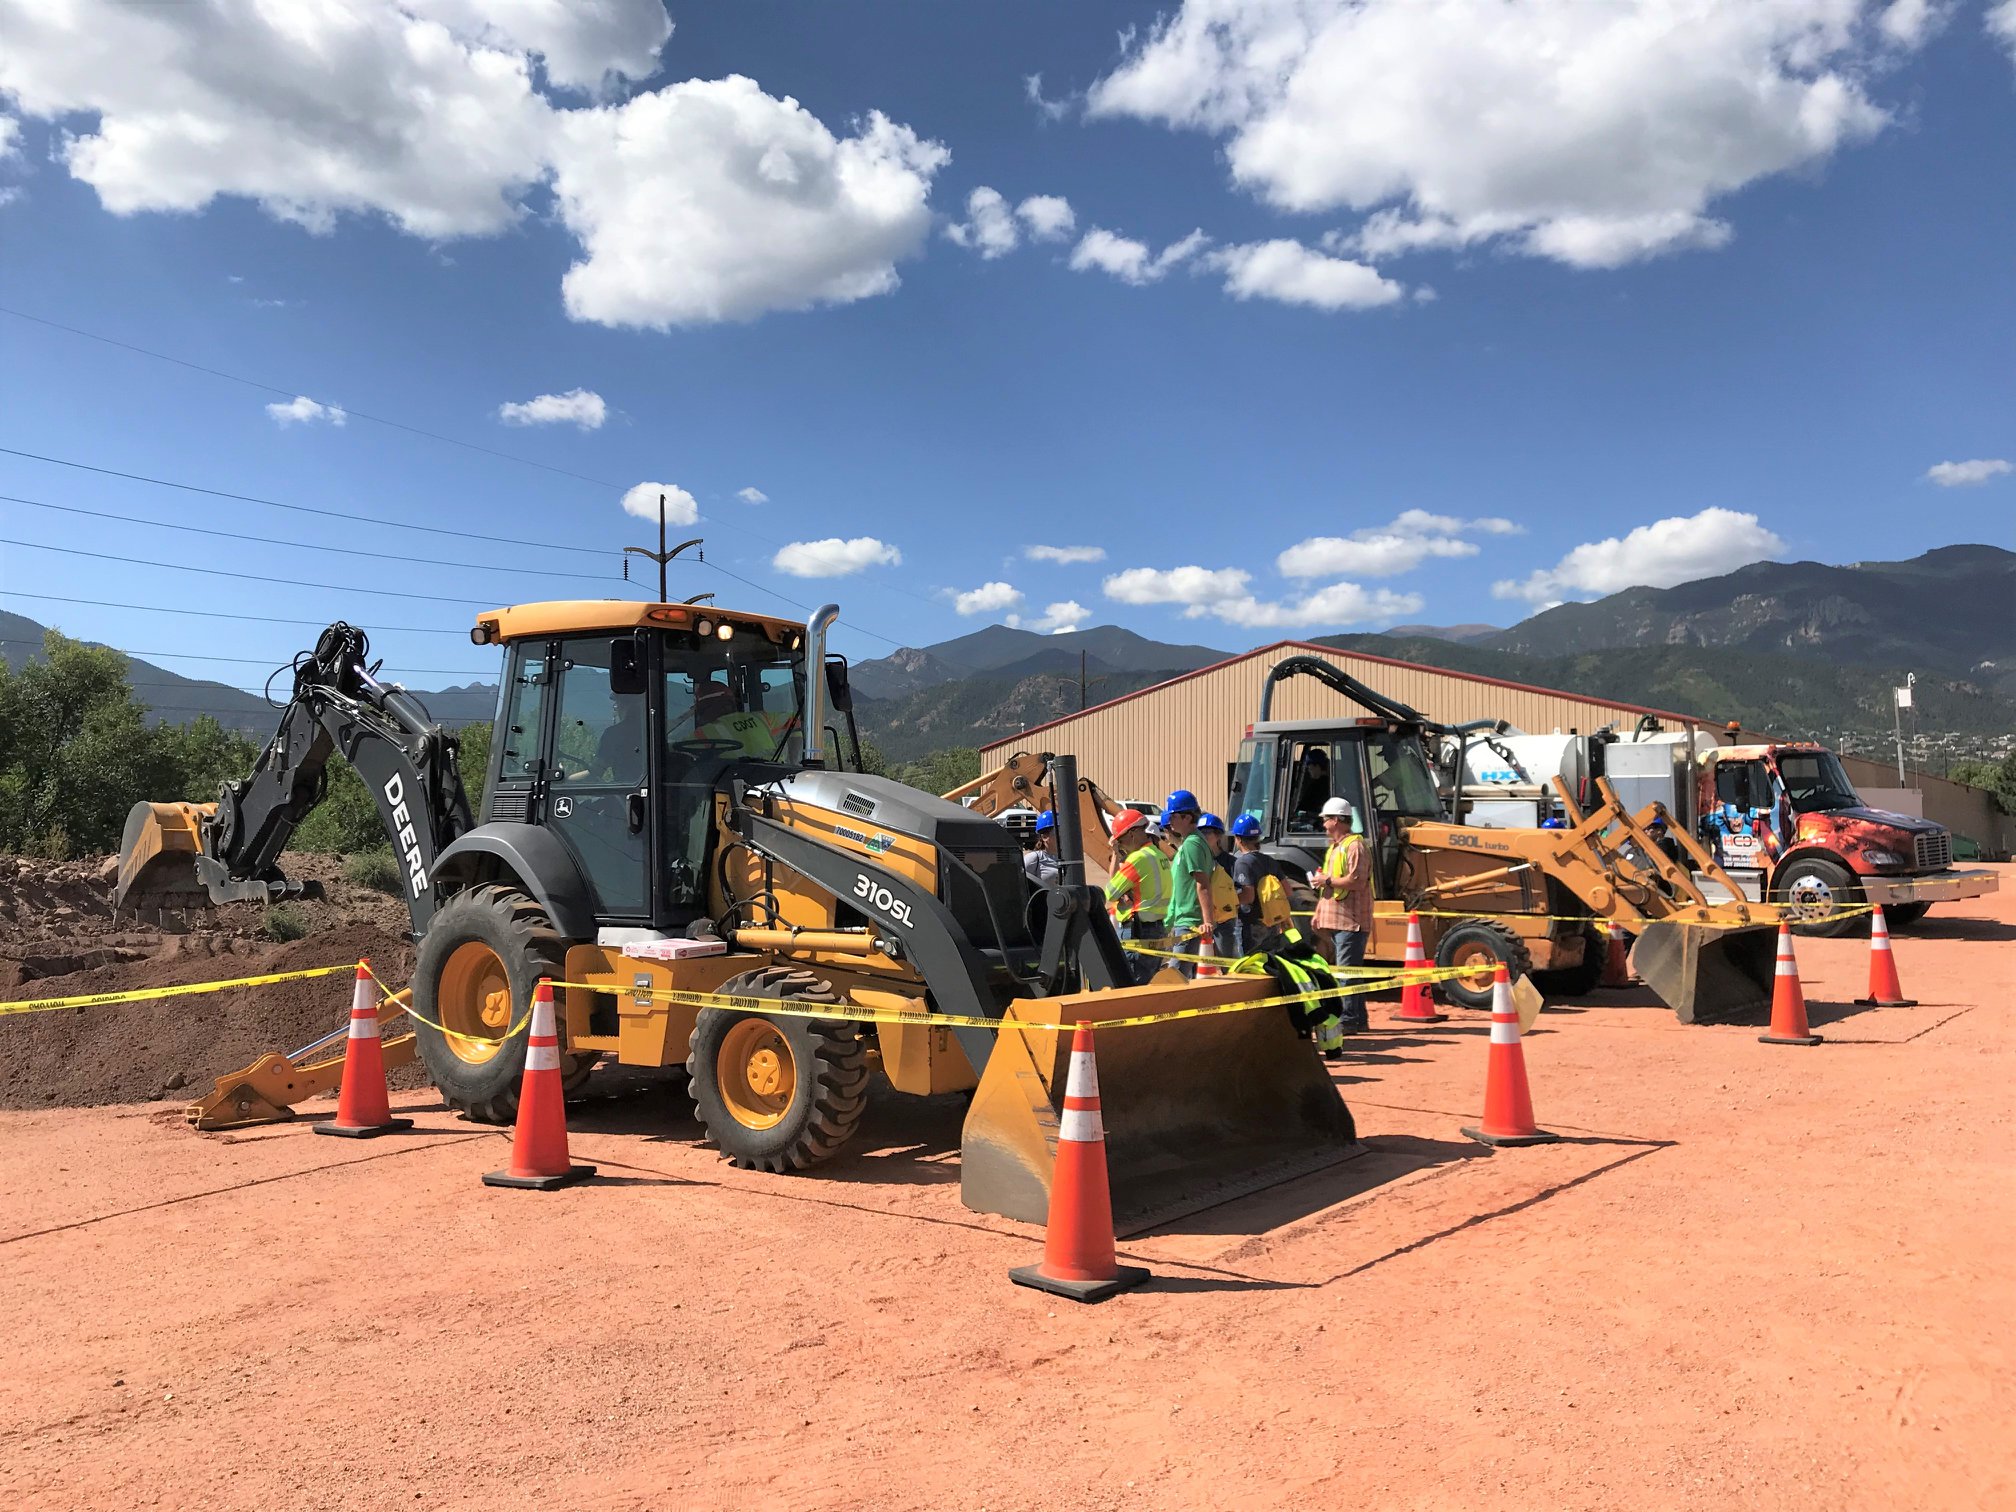 Construction Career Day of Southern Colorado